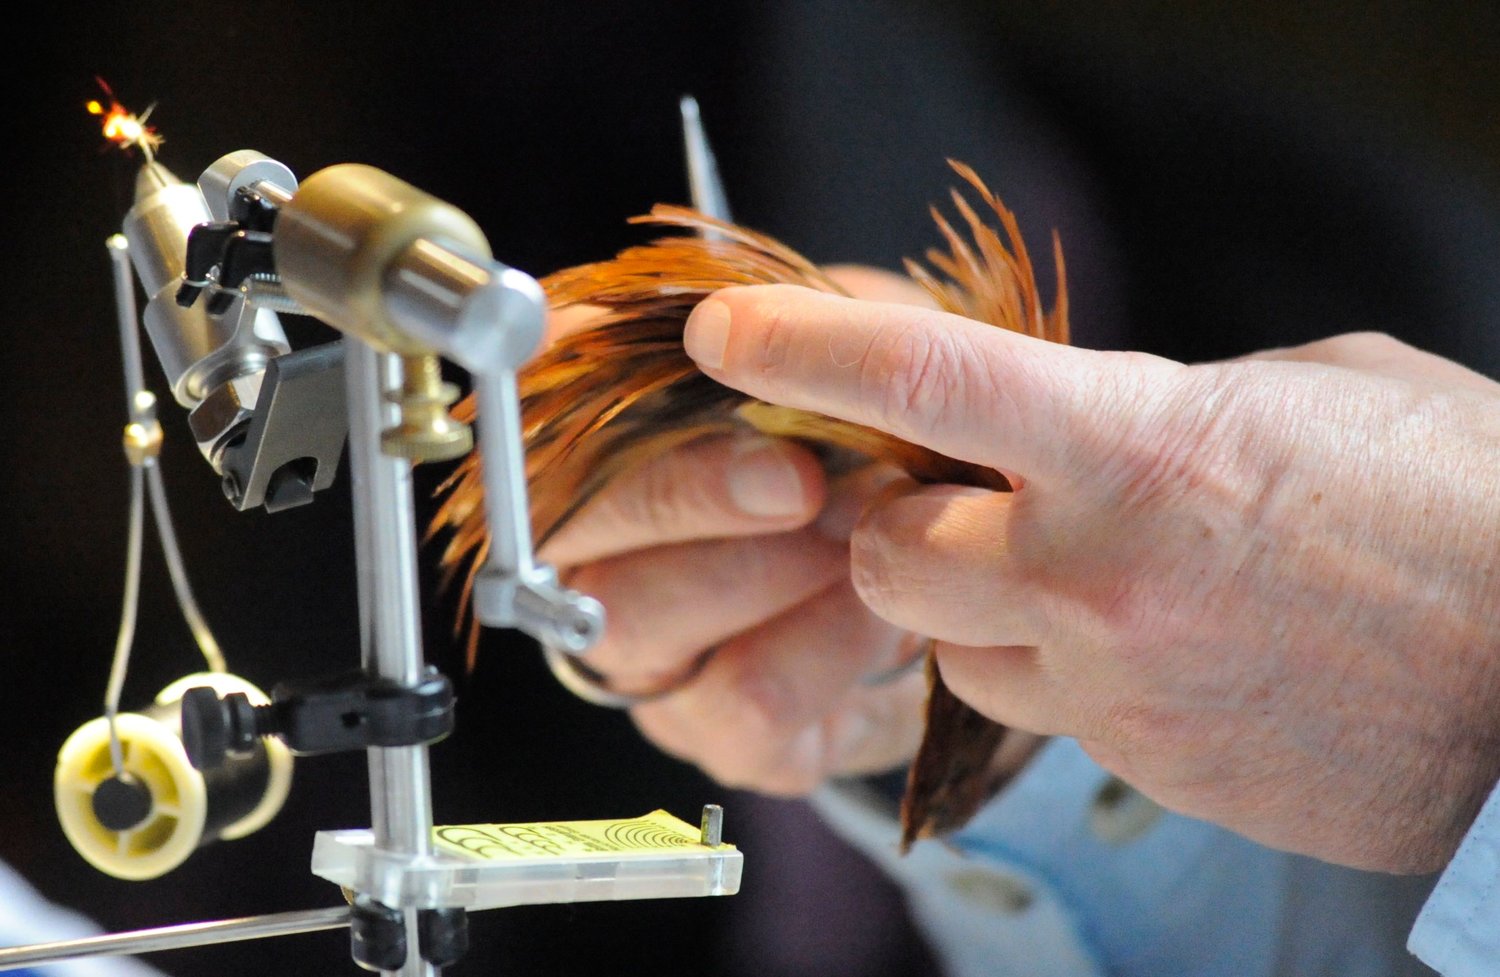 Creating a dry fly. Mike Stewart, a fly tier from North Granby, CT, concentrates on fashioning a fly from feathers and colored yarn.